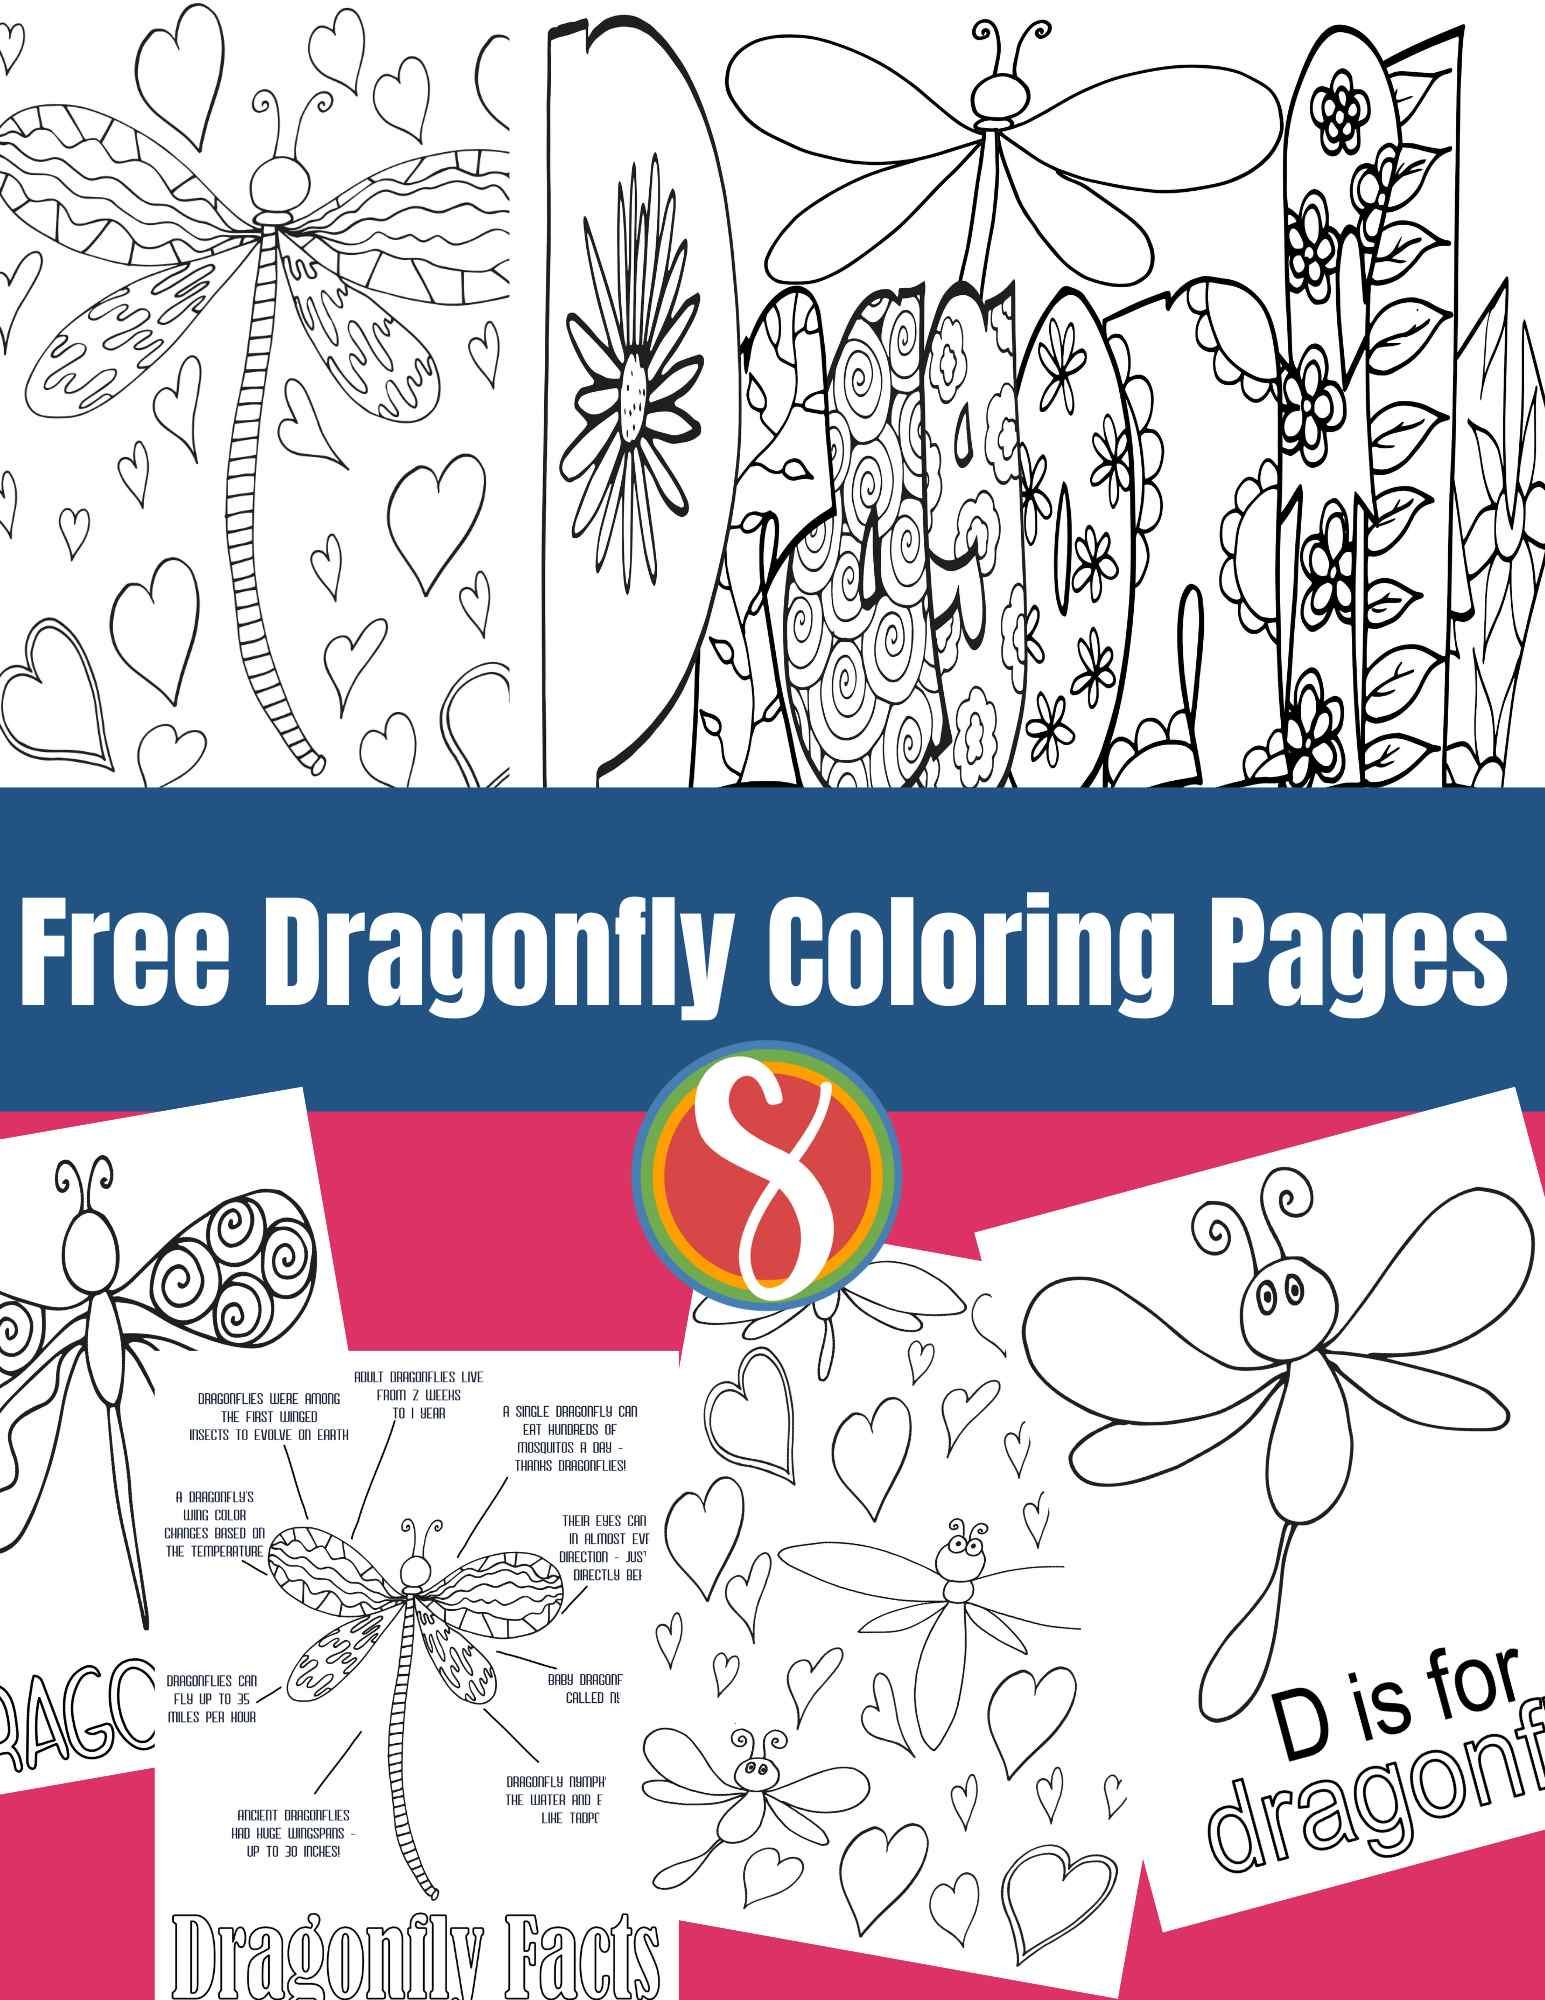 collage of free dragonfly coloring pages for girls